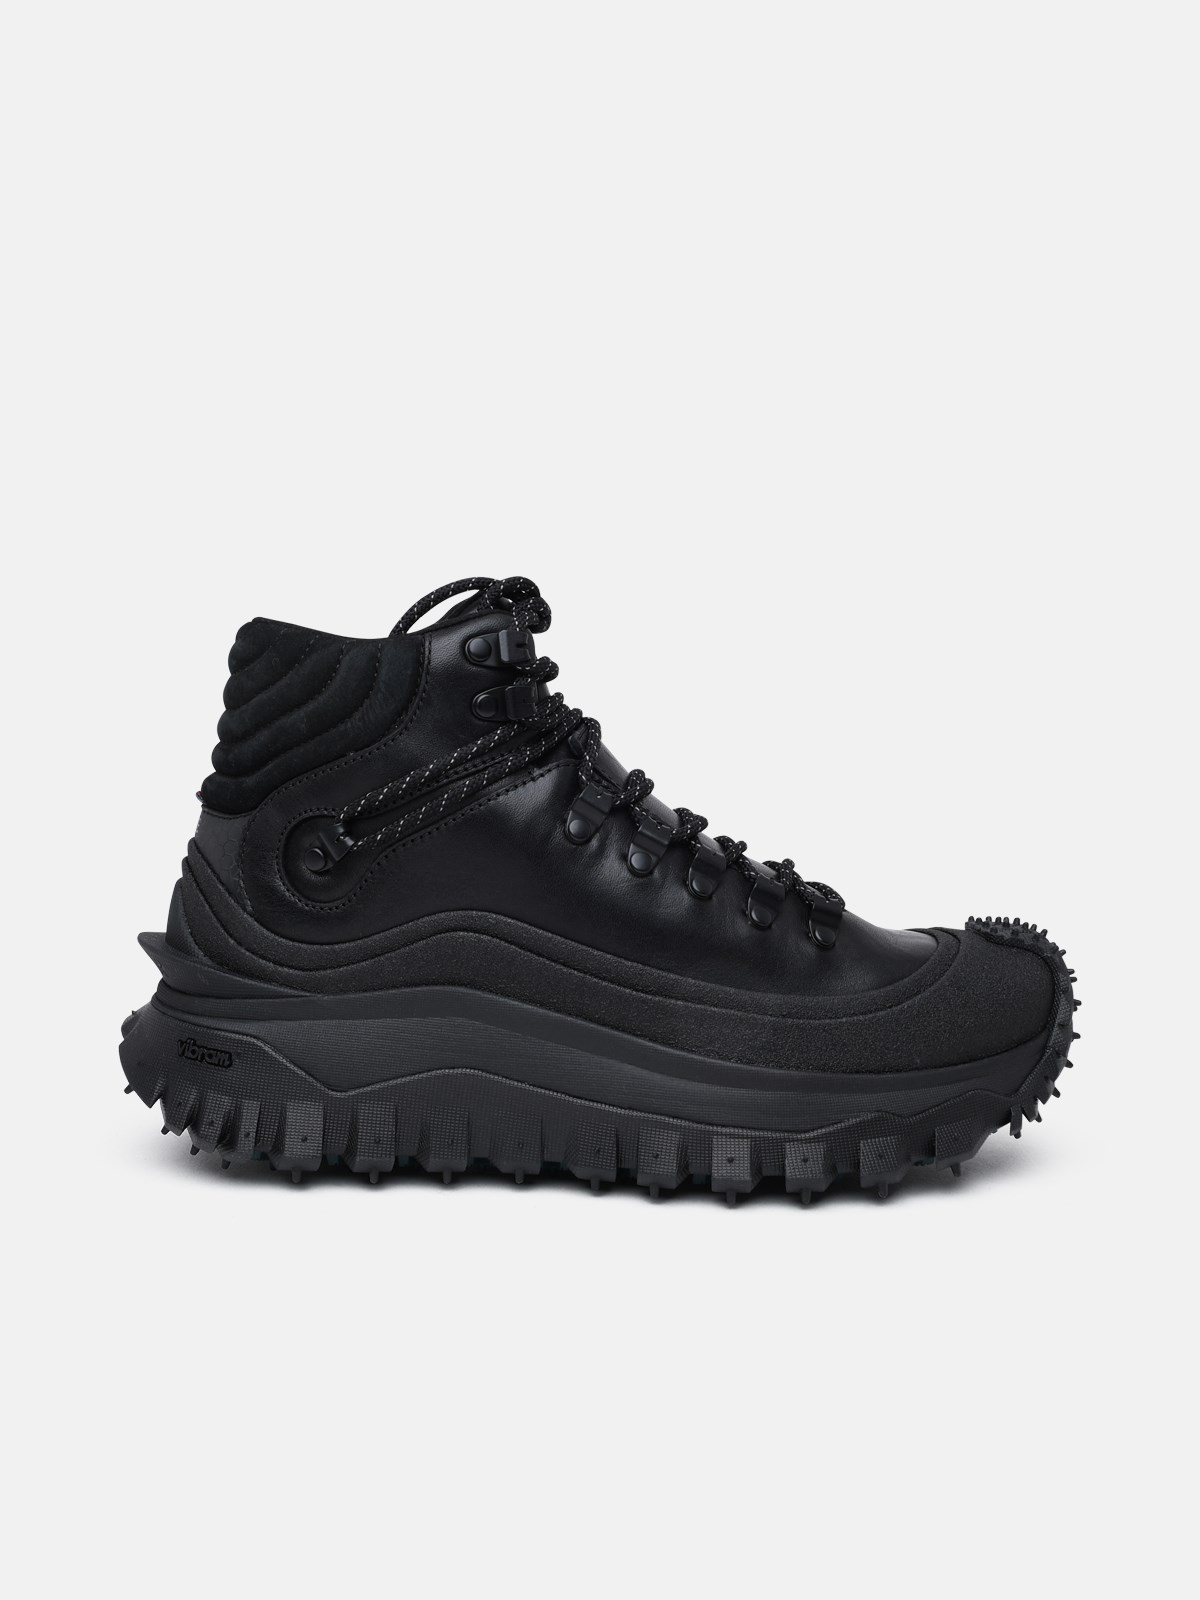 Moncler Black Leather Trailgrip Gtx Sneakers